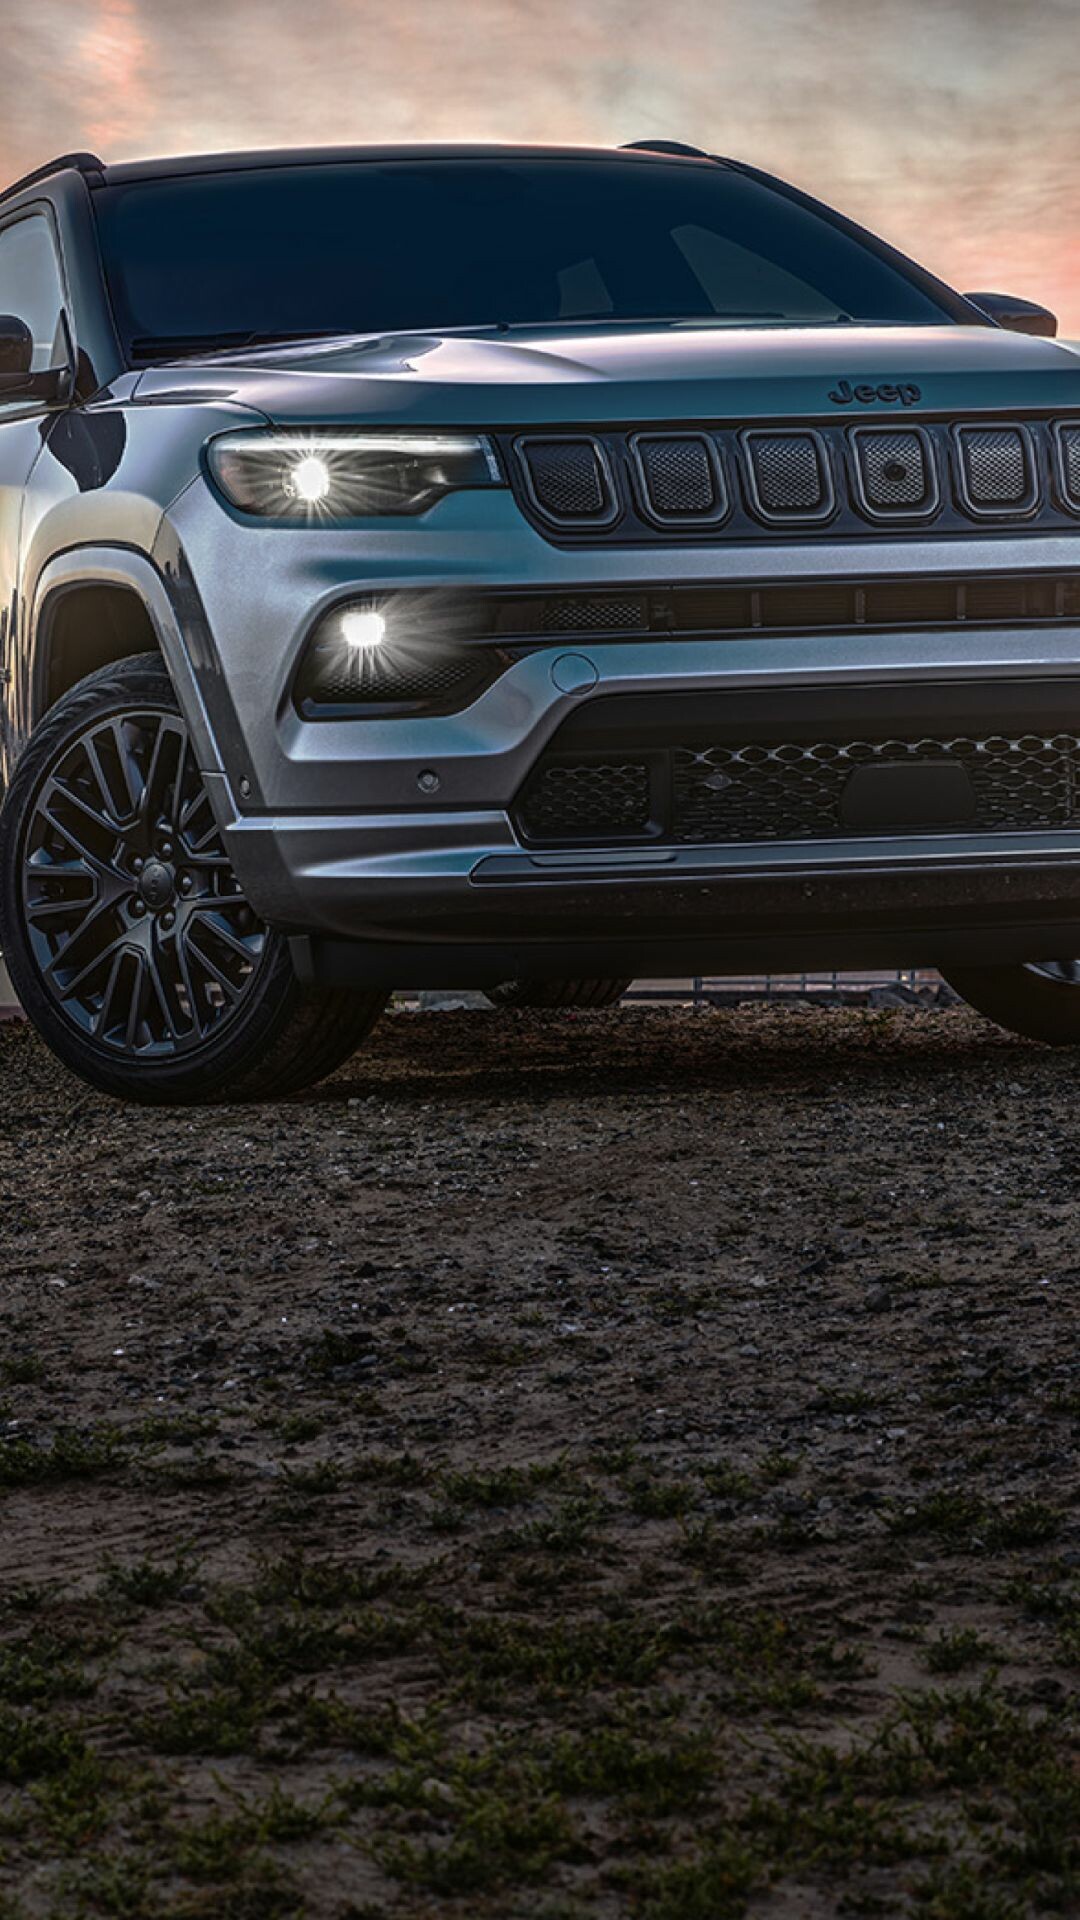 Jeep Grand Cherokee: Powerful truck, Offered in multiple trims, 4×4. 1080x1920 Full HD Background.